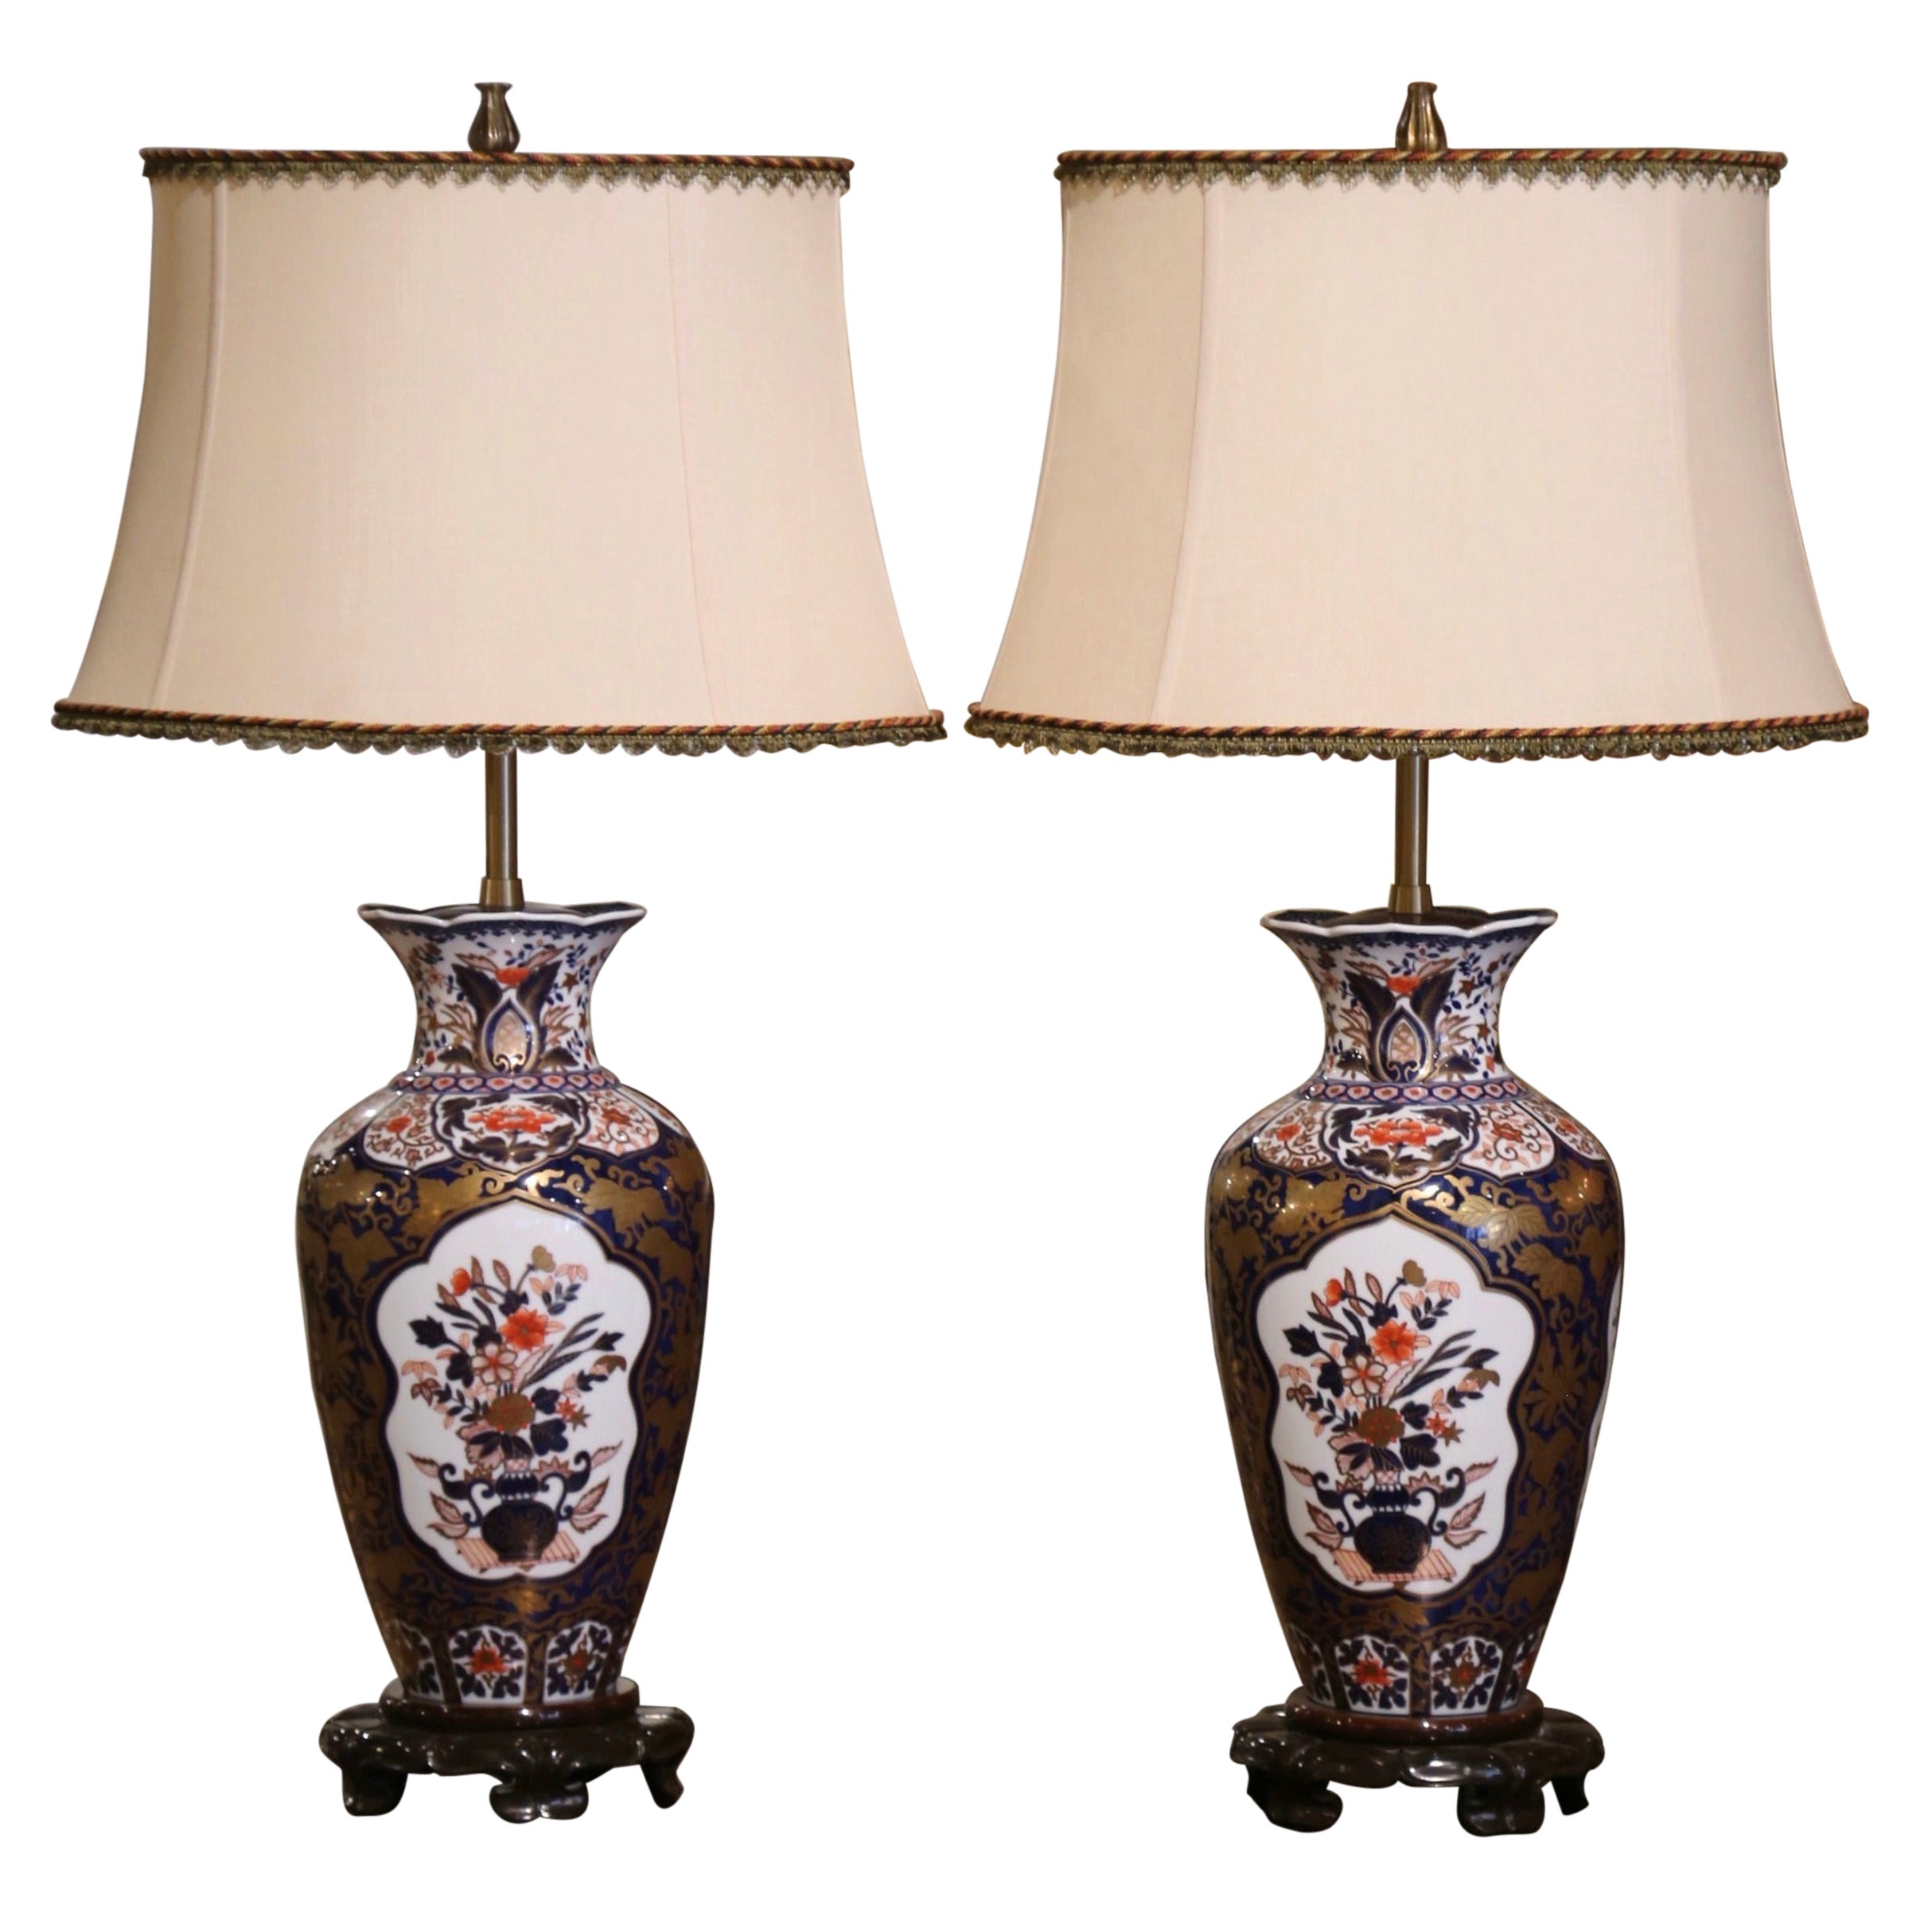 Pair of Early 20th Century Imari Porcelain Vases Mounted as Table Lamps  For Sale